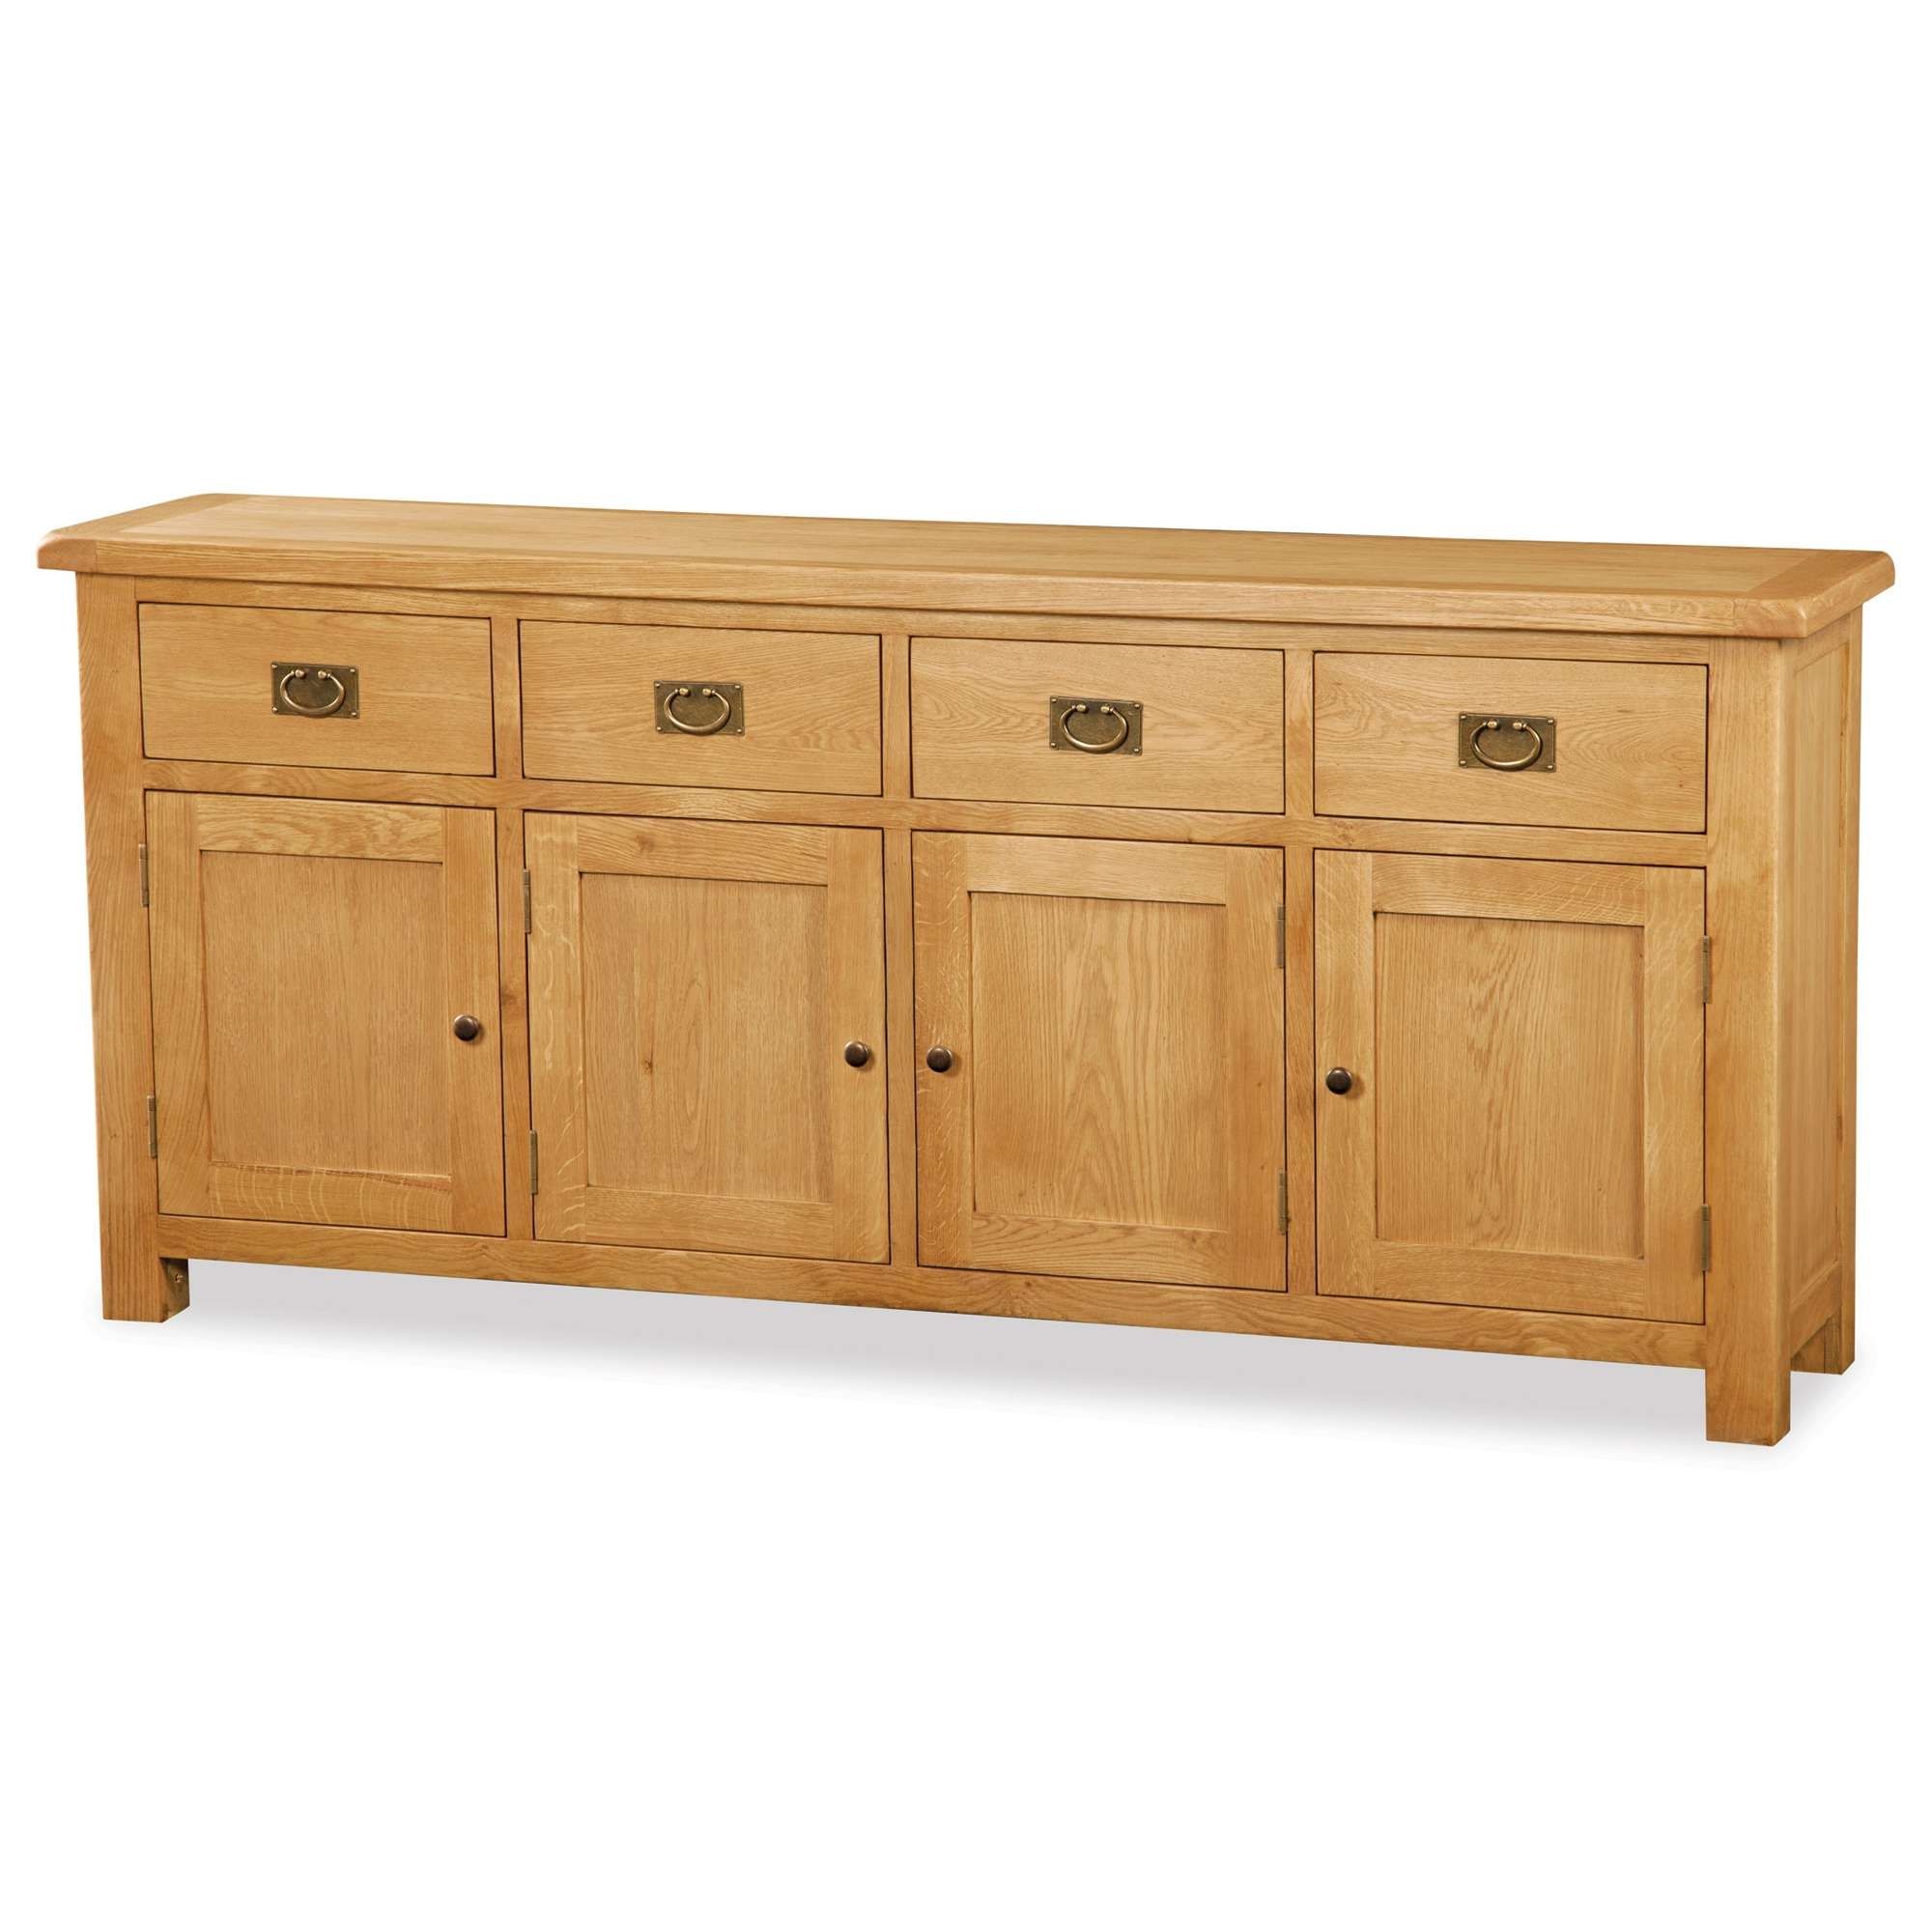 Cardington Extra Large Solid Oak Sideboard For Solid Oak Sideboards (View 1 of 20)